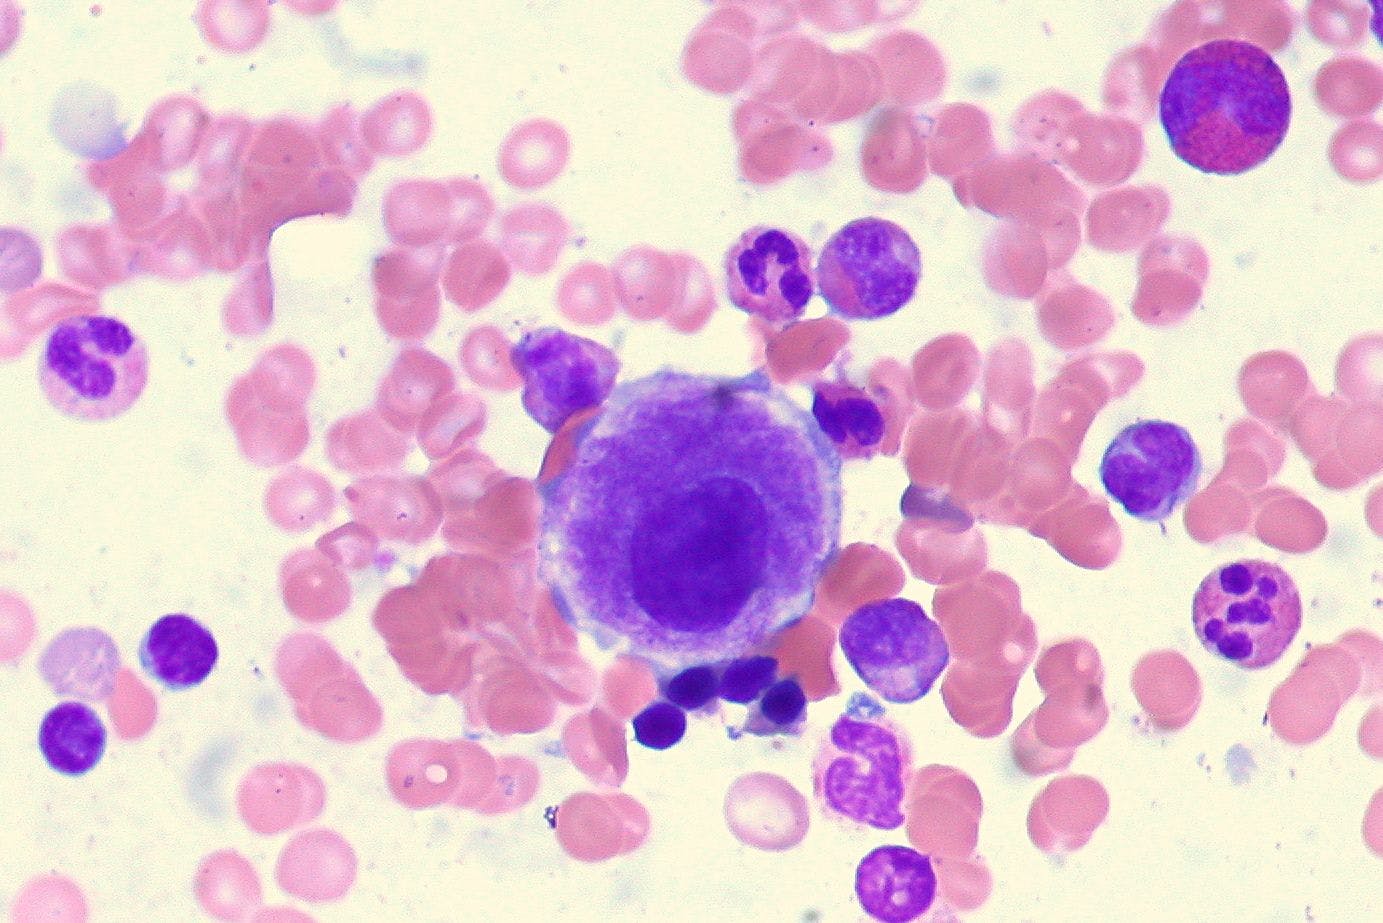 Luspatercept may lead to a paradigm shift in the treatment of patients with lower-risk myelodysplastic syndrome, according to an expert from The University of Texas MD Anderson Cancer Center.